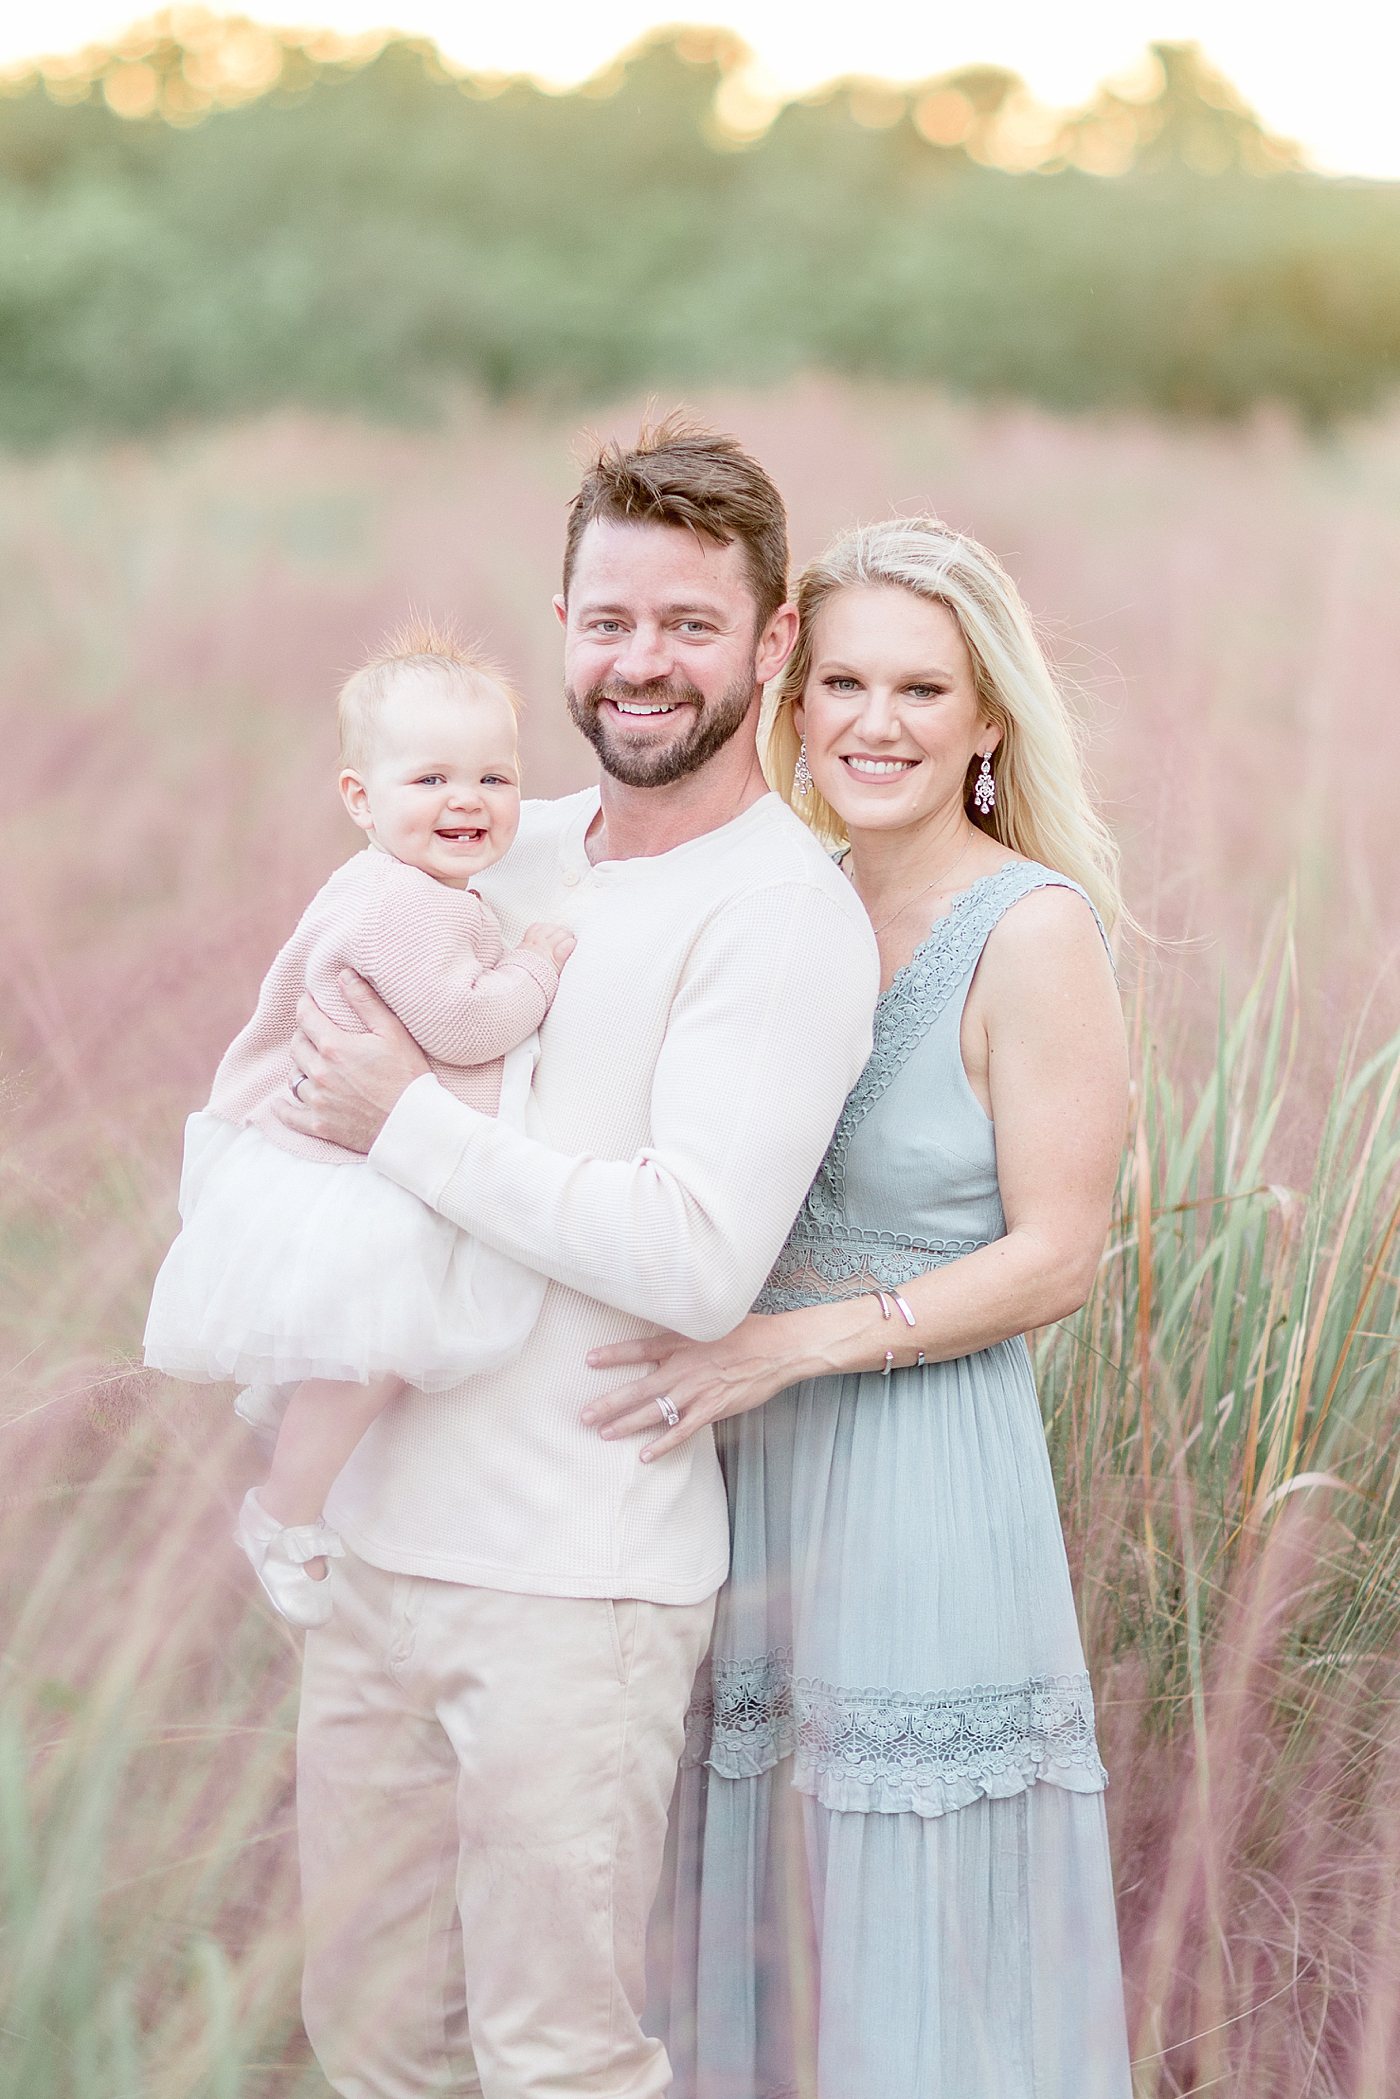 Mom and Dad with their one year old daughter. Photo by Brittany Elise Photography.